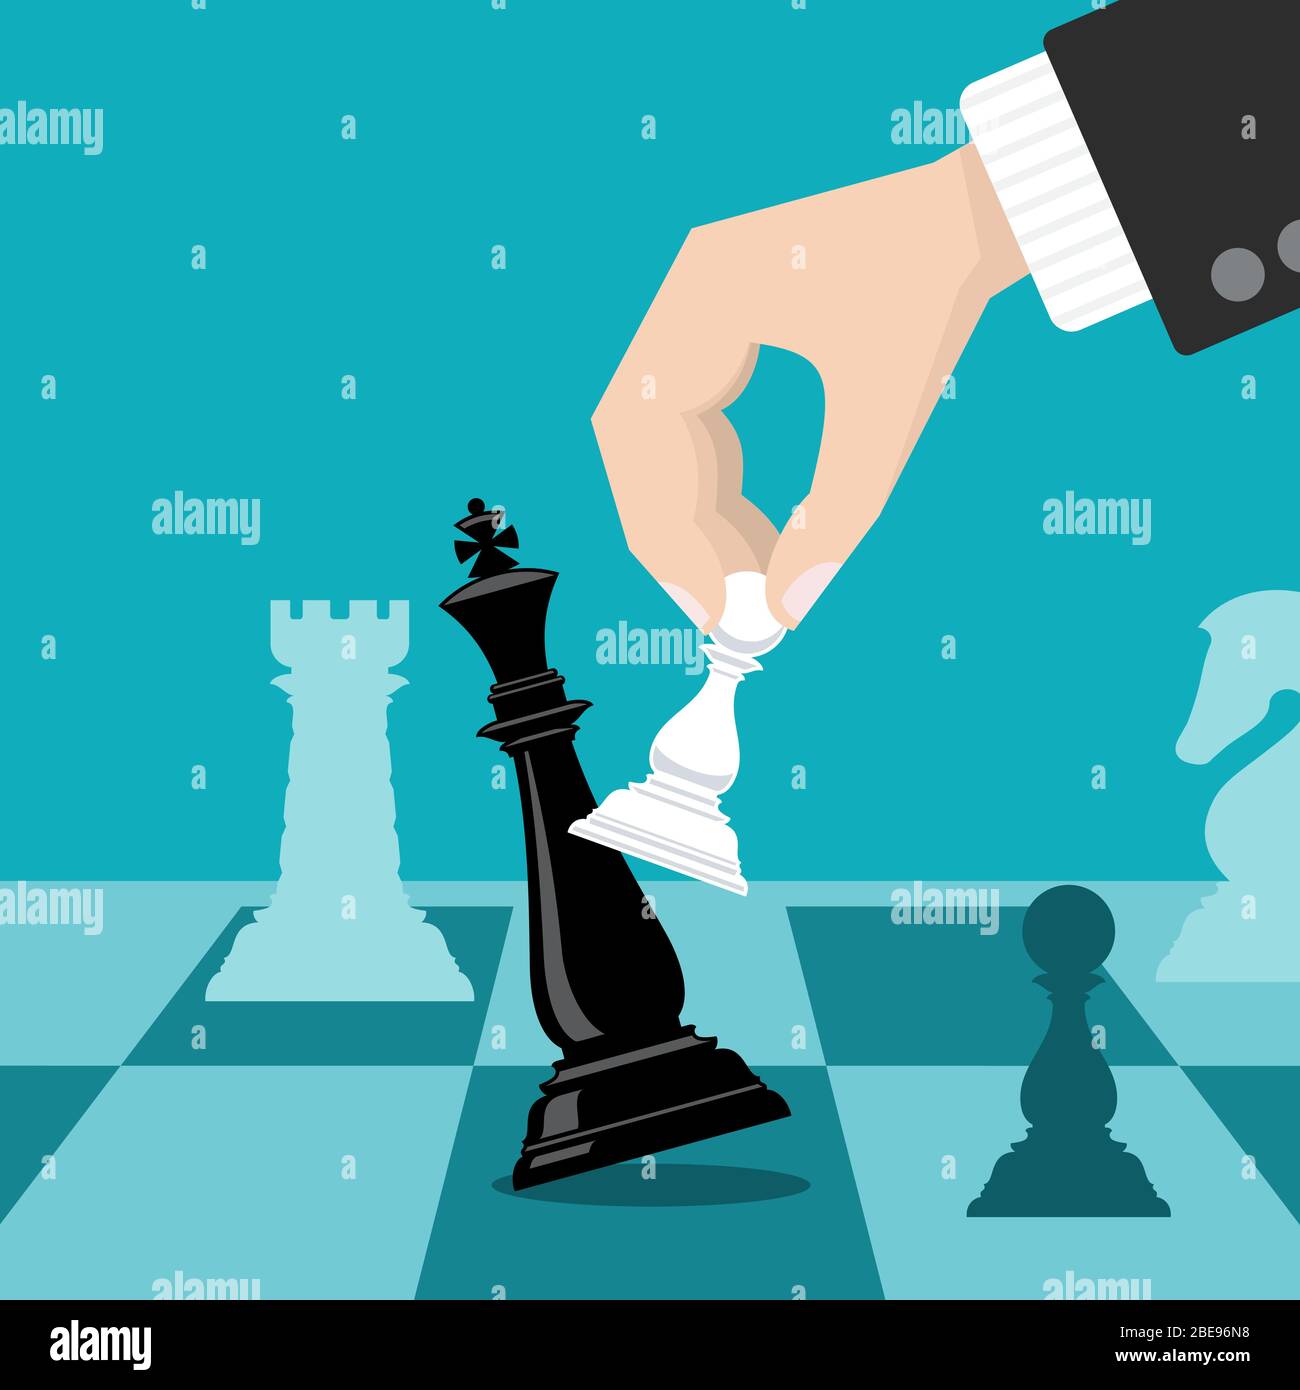 Business checkmate strategy vector concept with hand holding chess pawn knocking down king. Business strategy win metaphor illustration Stock Vector